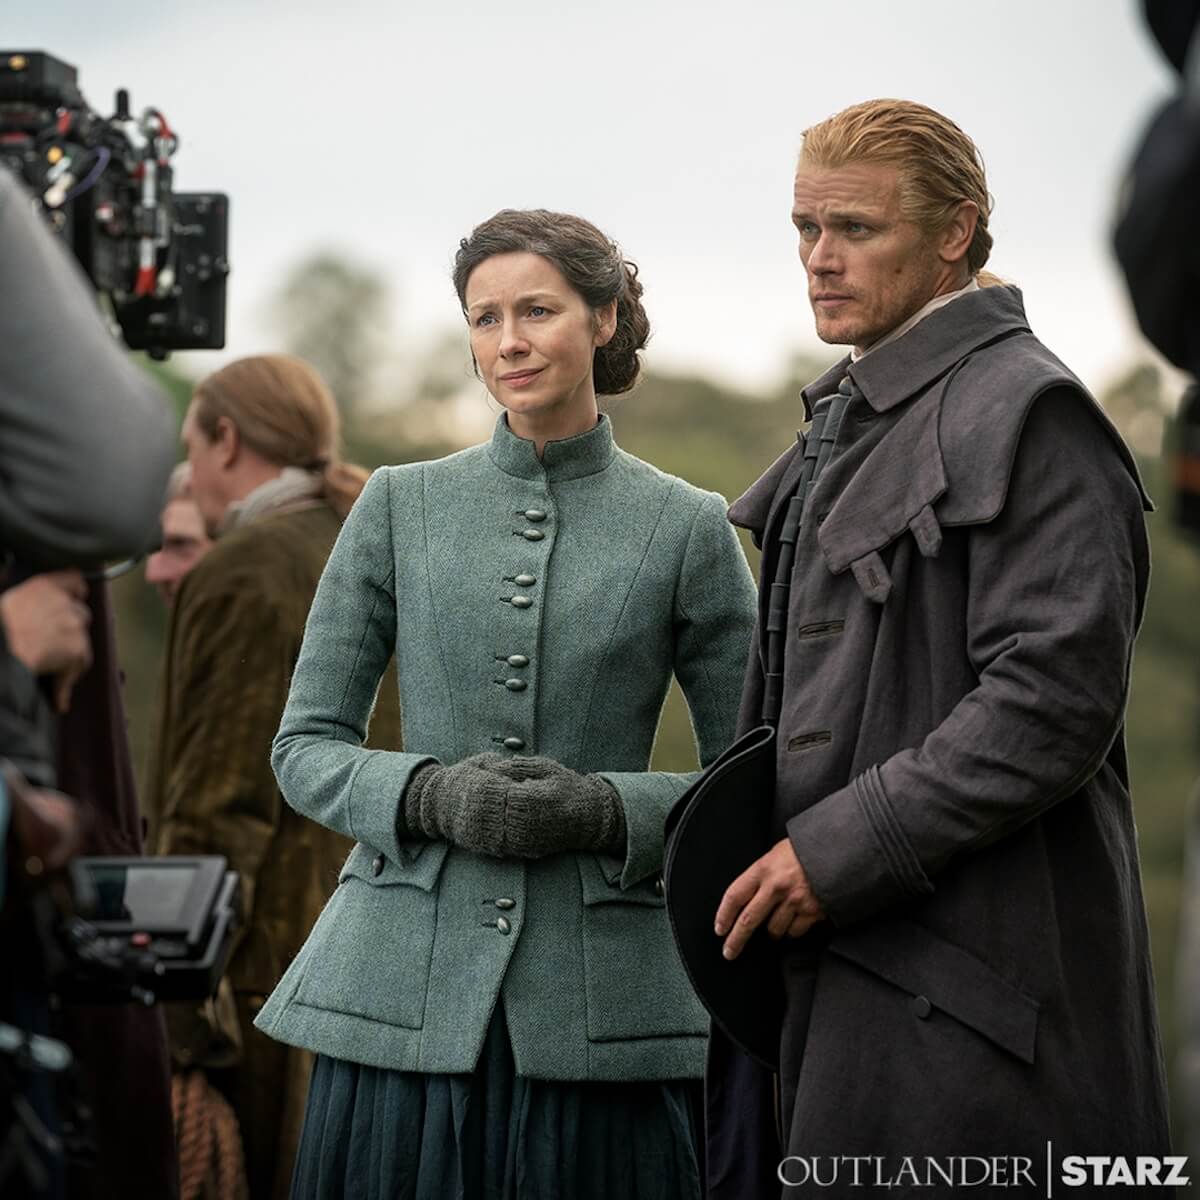 Caitriona Balfe and Sam Heughan filming an episode of 'Outlander'